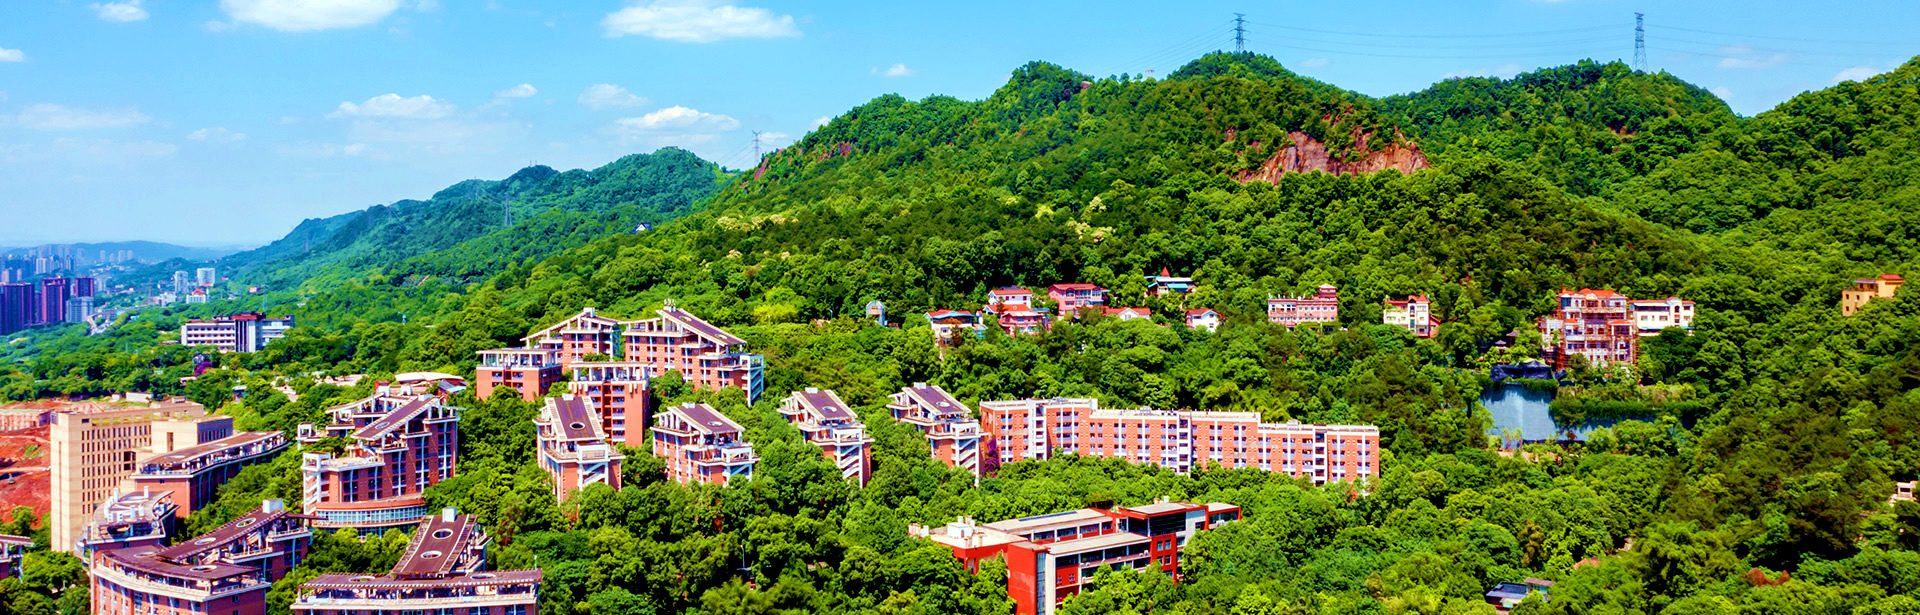 School of Business Administration, Chongqing Technology and Business University